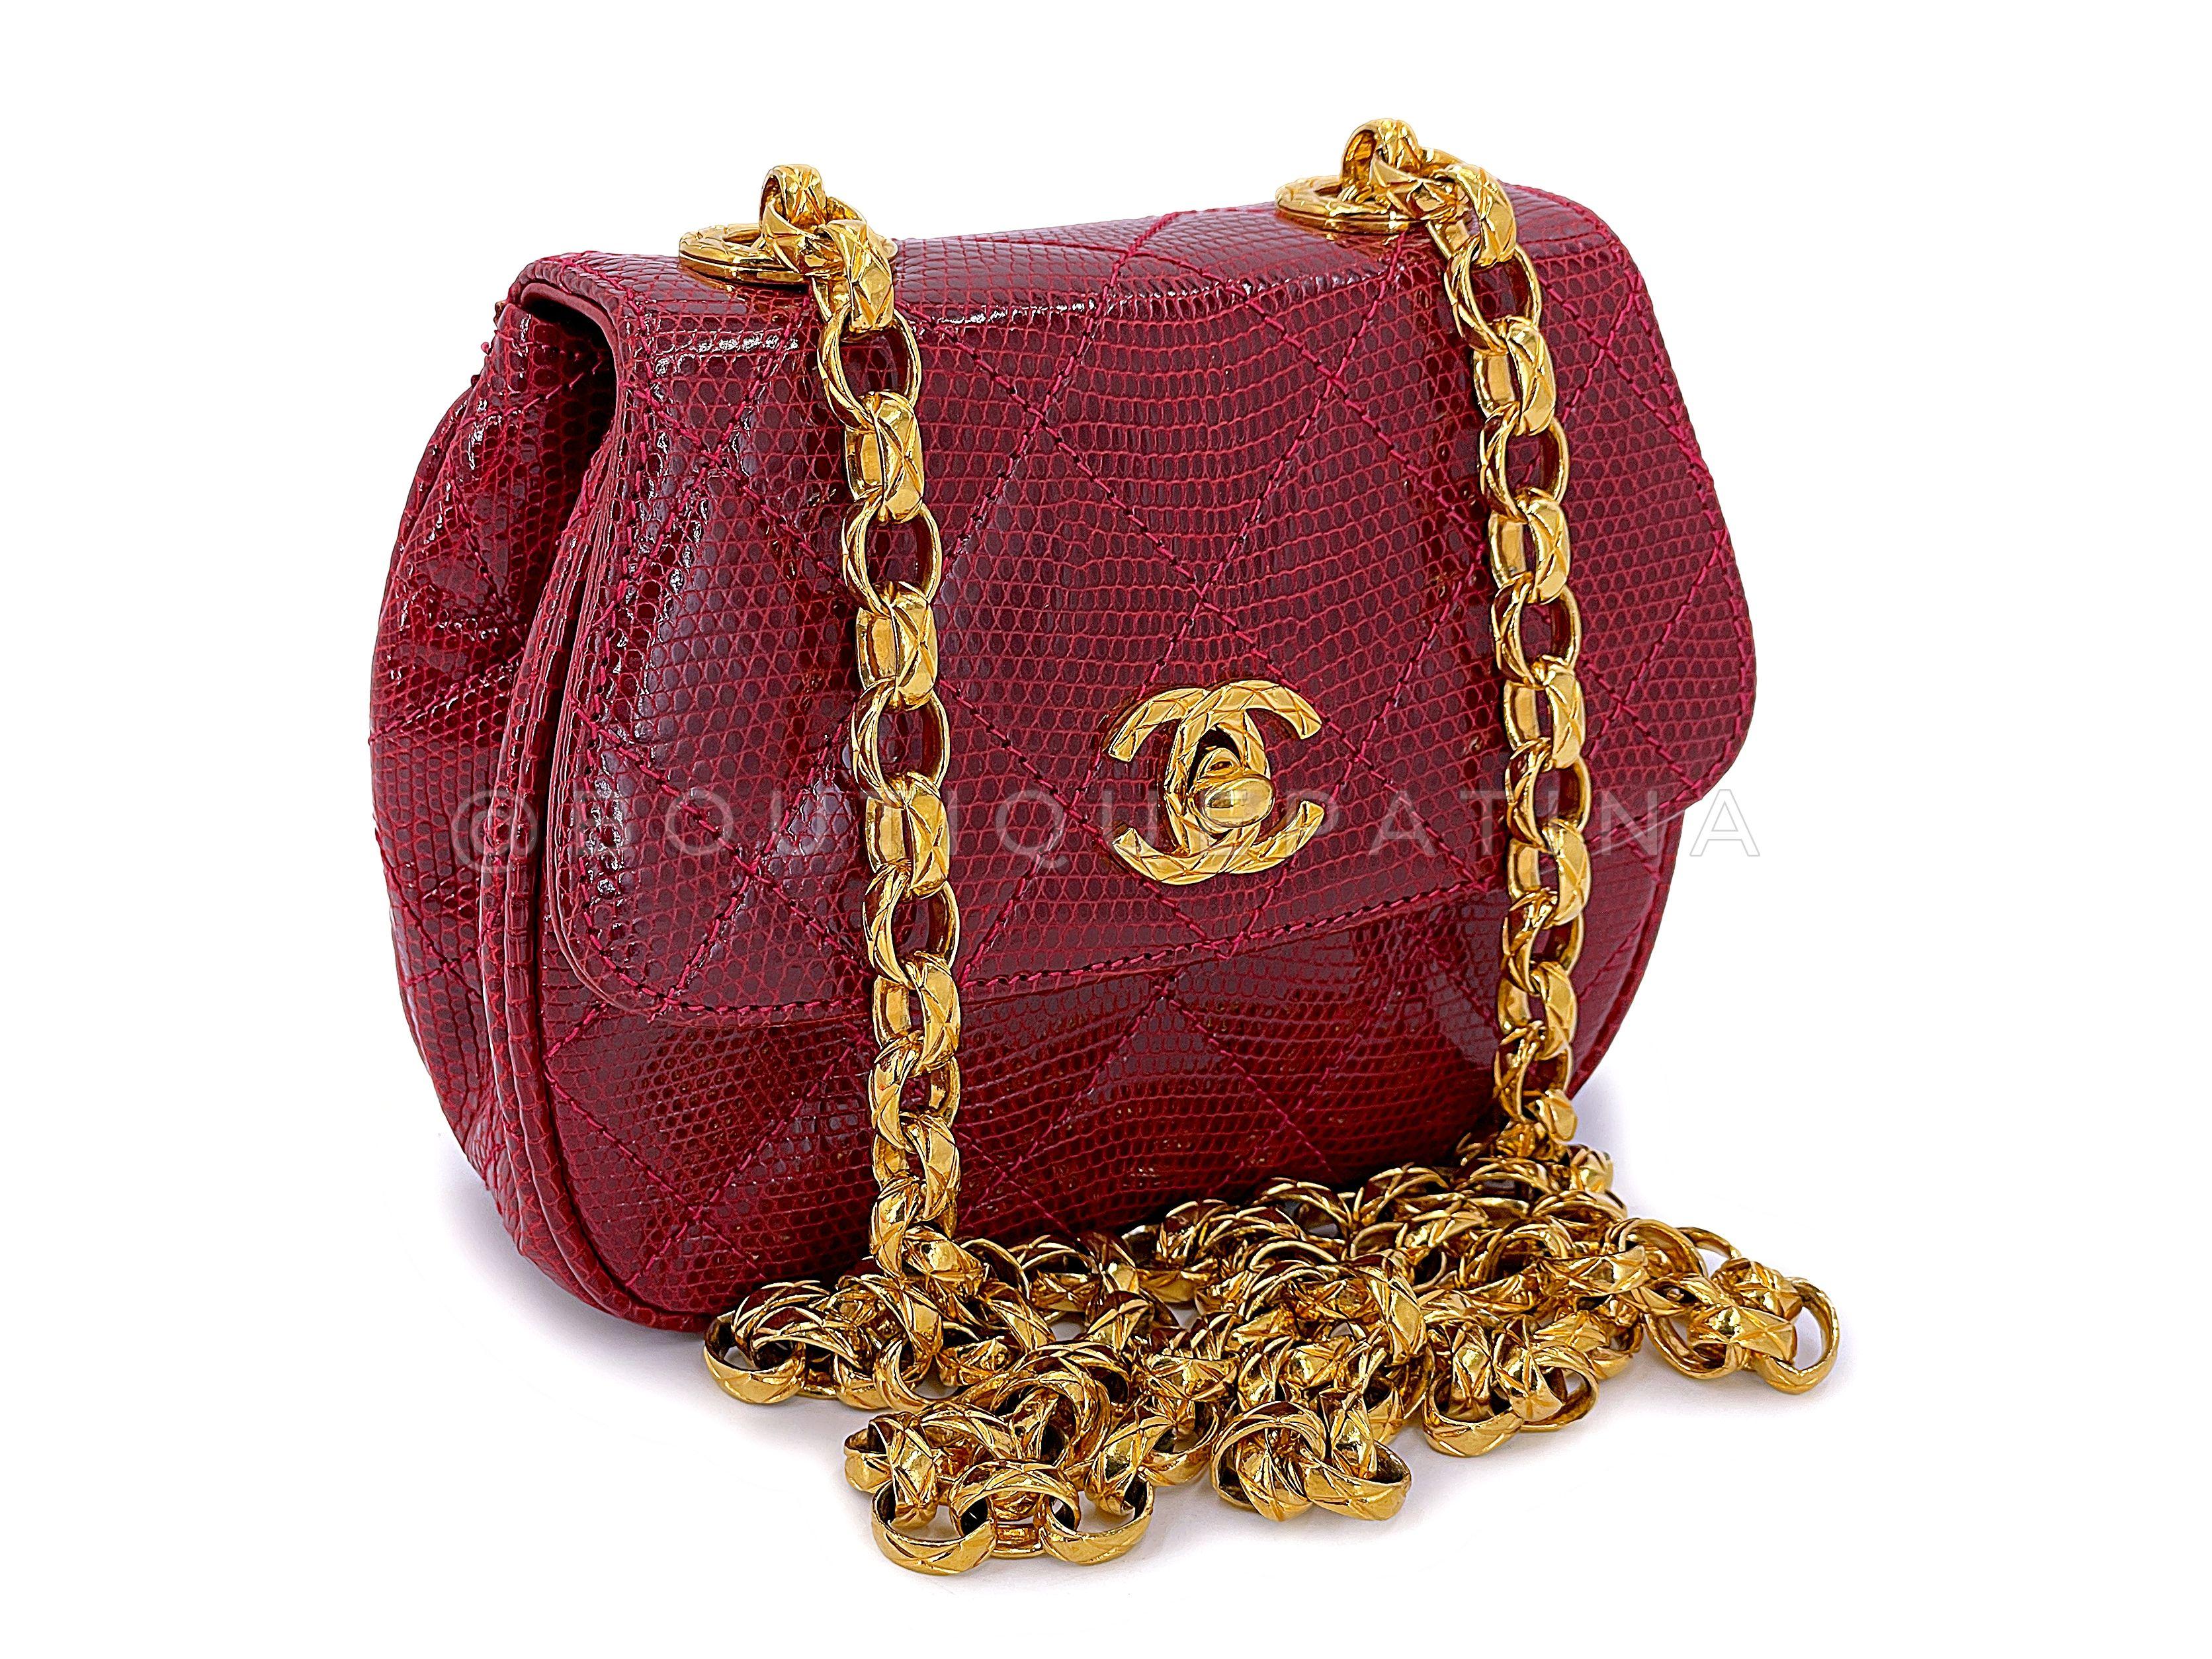 Store item: 67290
This Rare Chanel 1980s Vintage Red Lizard Etched Chain Round Mini Flap Bag is a rare gem of a bag - for too many reasons. 

The red quilted lizard leather is in pristine condition, as is the side piping and lambskin leather